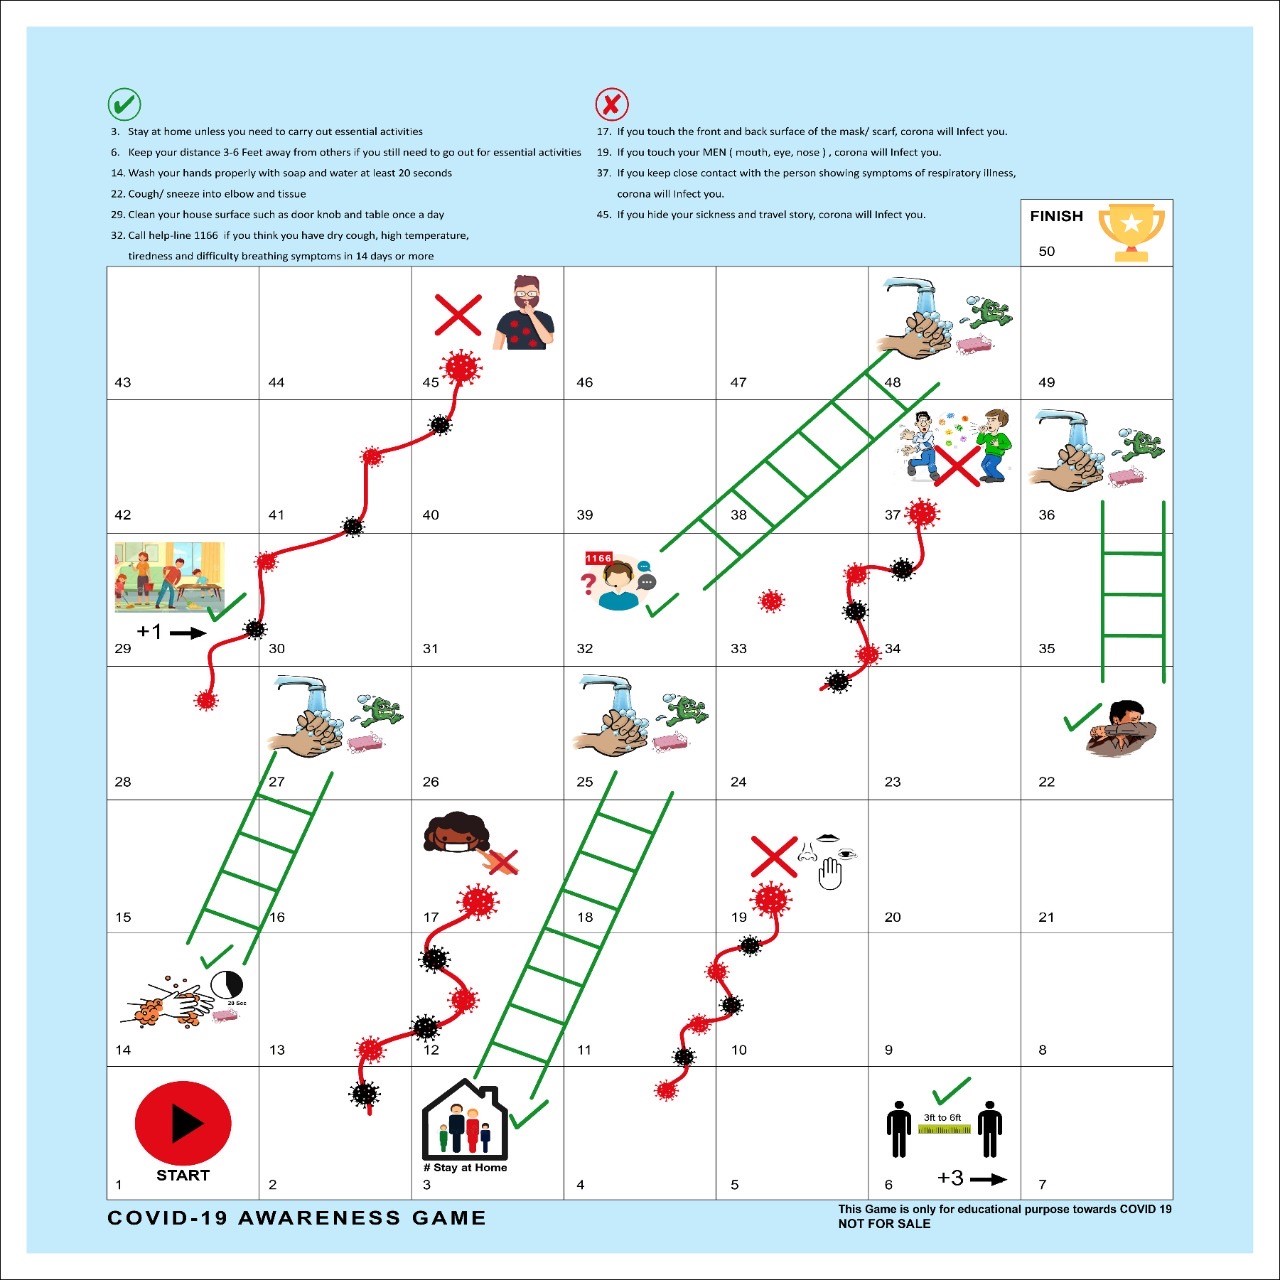 The snakes and ladders game